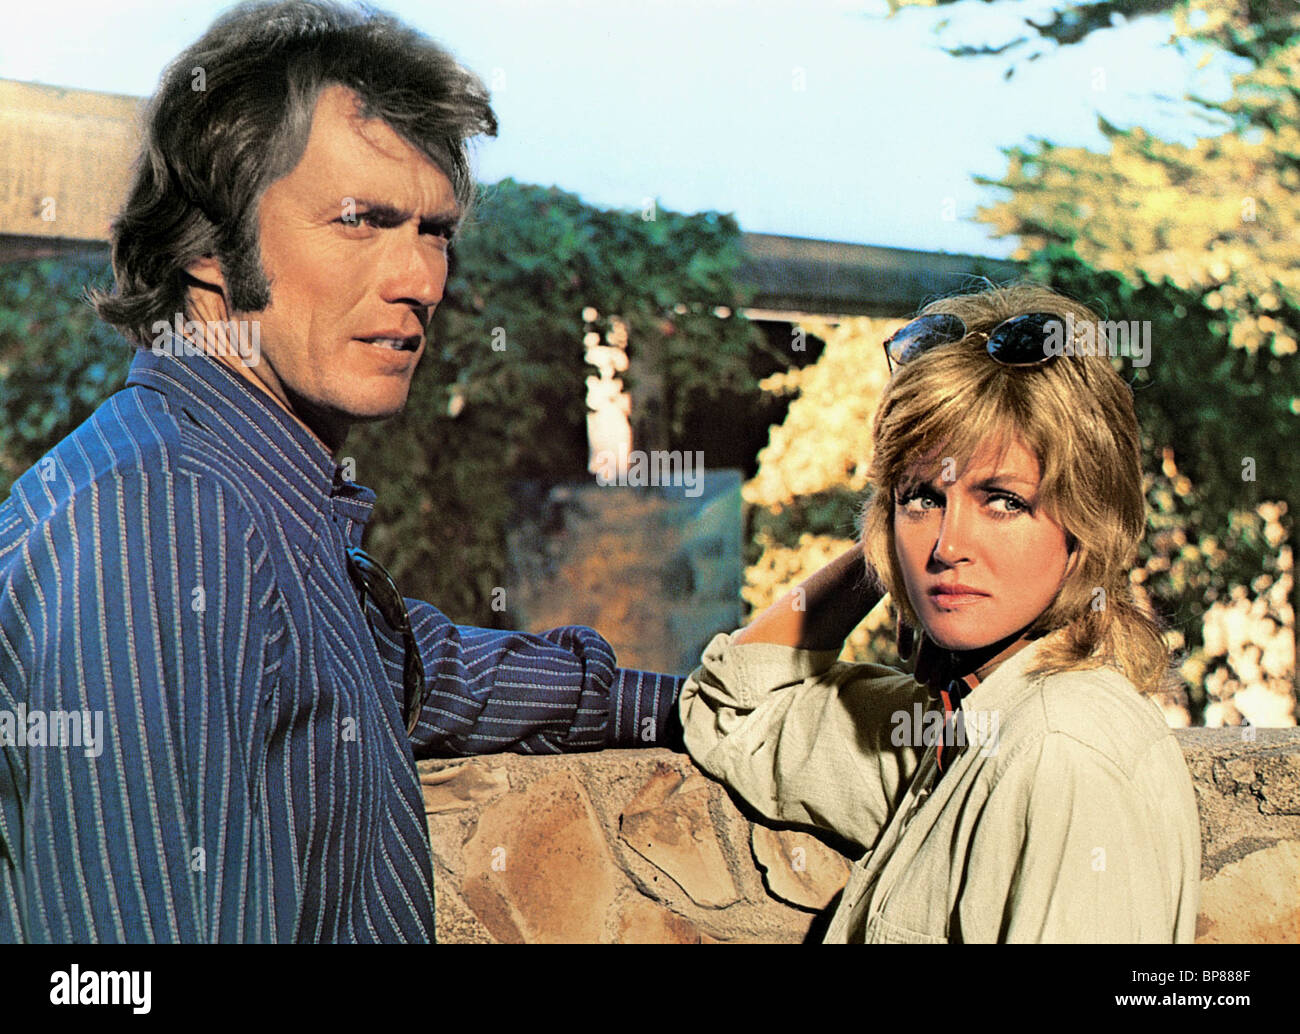 clint-eastwood-donna-mills-play-misty-for-me-1971-BP888F.jpg